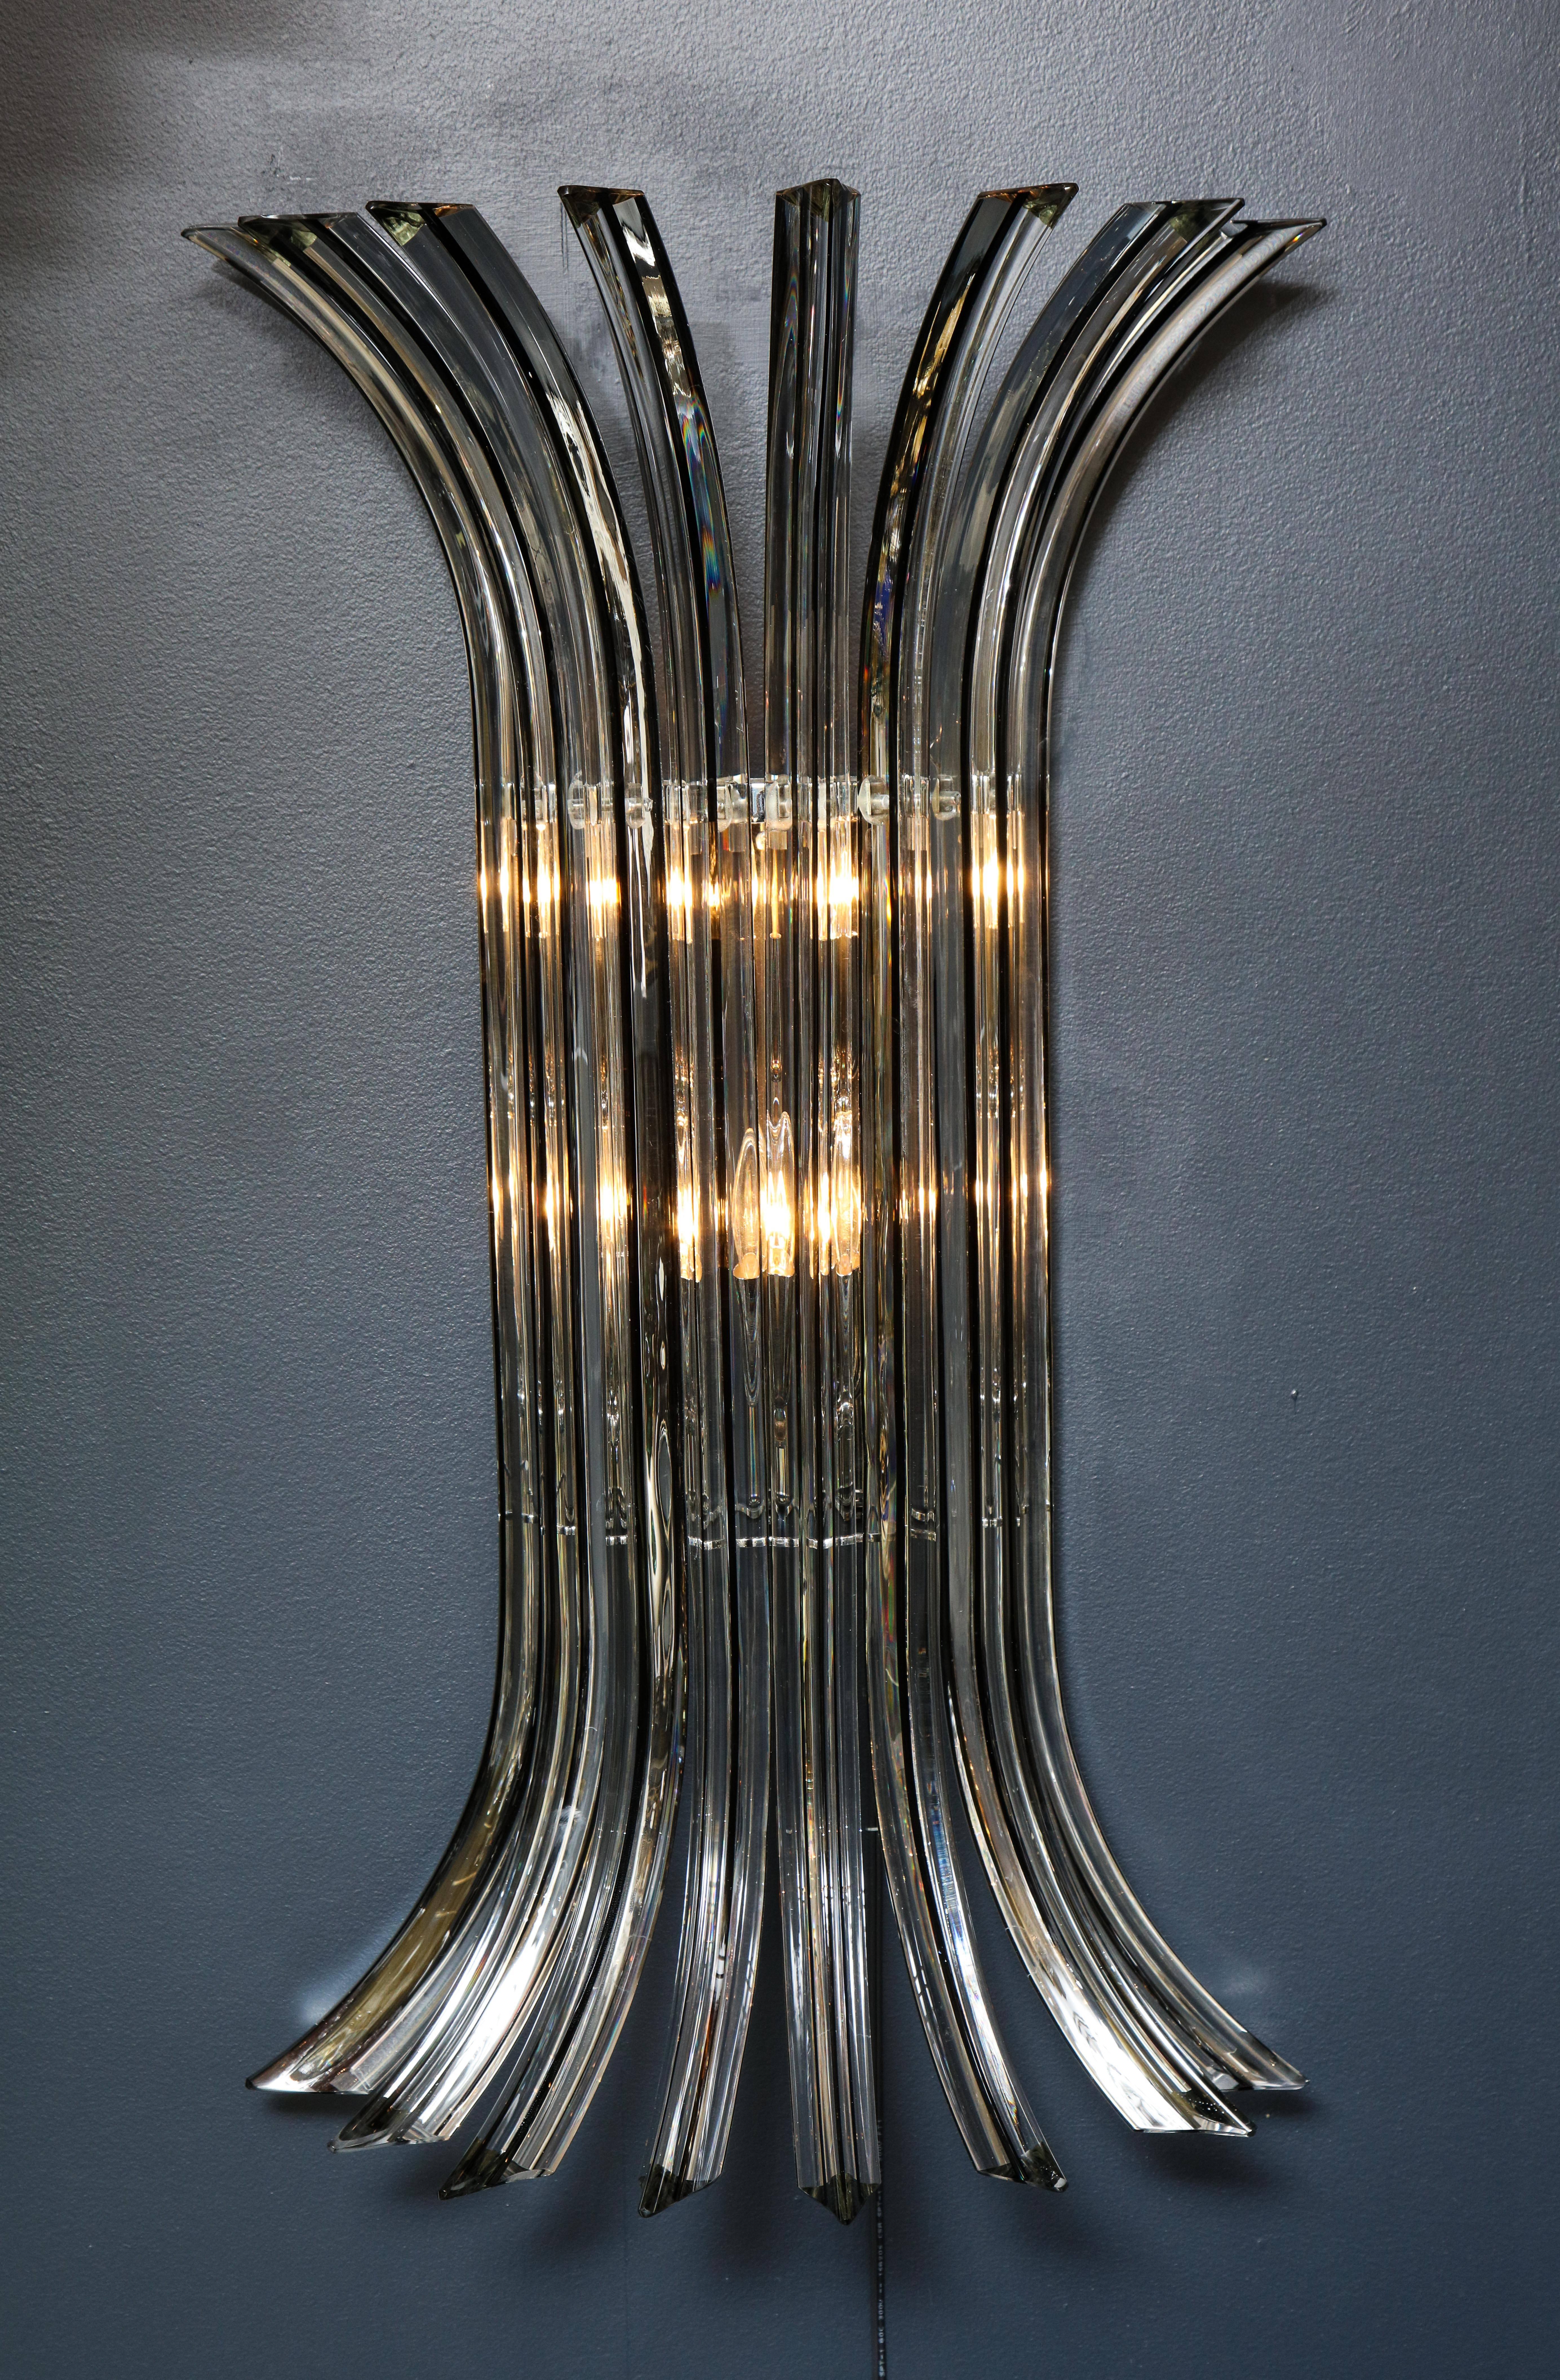 Large pair of Italian hand blown Murano glass sconces made of eight curved rods in clear Murano glass with a fine black glass core or vein in the center. The light bounces beautifully off the “Triedi” (three faceted) rods, creating a shimmering